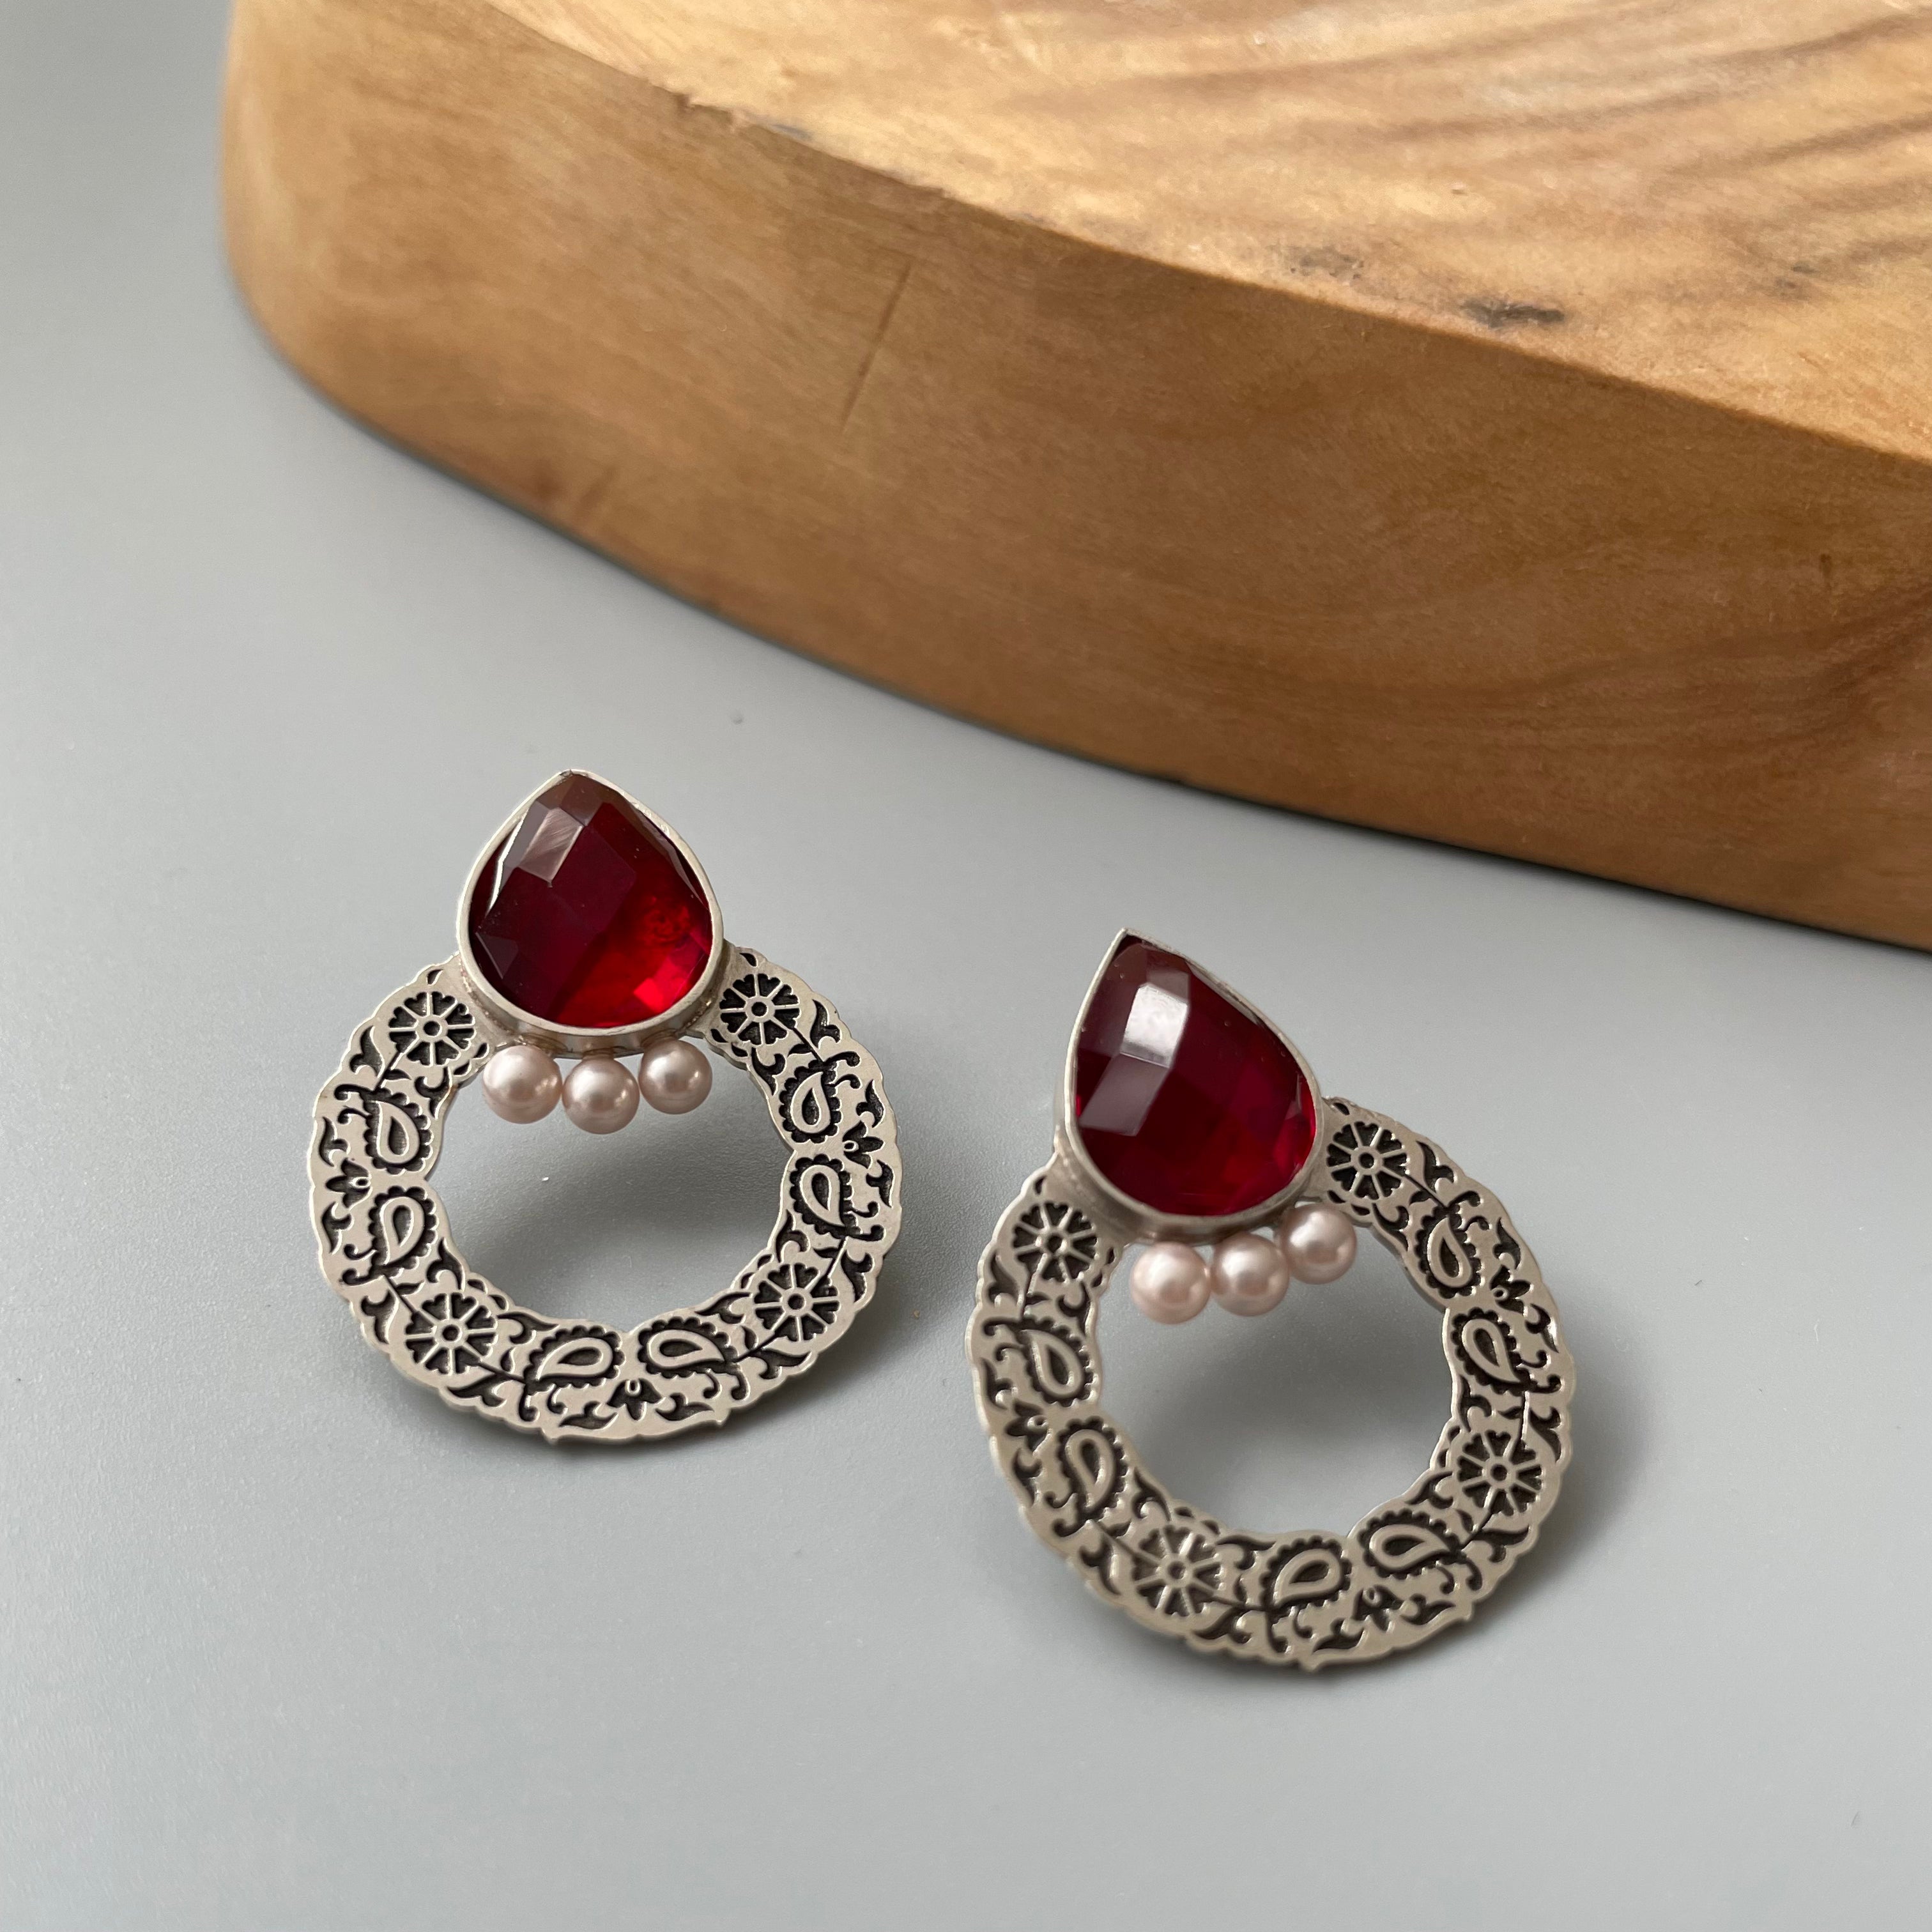 Persian Earrings-Handmade Persian Earrings with Engraving and Red Crystal:Persian Jewelry-AFRA ART GALLERY